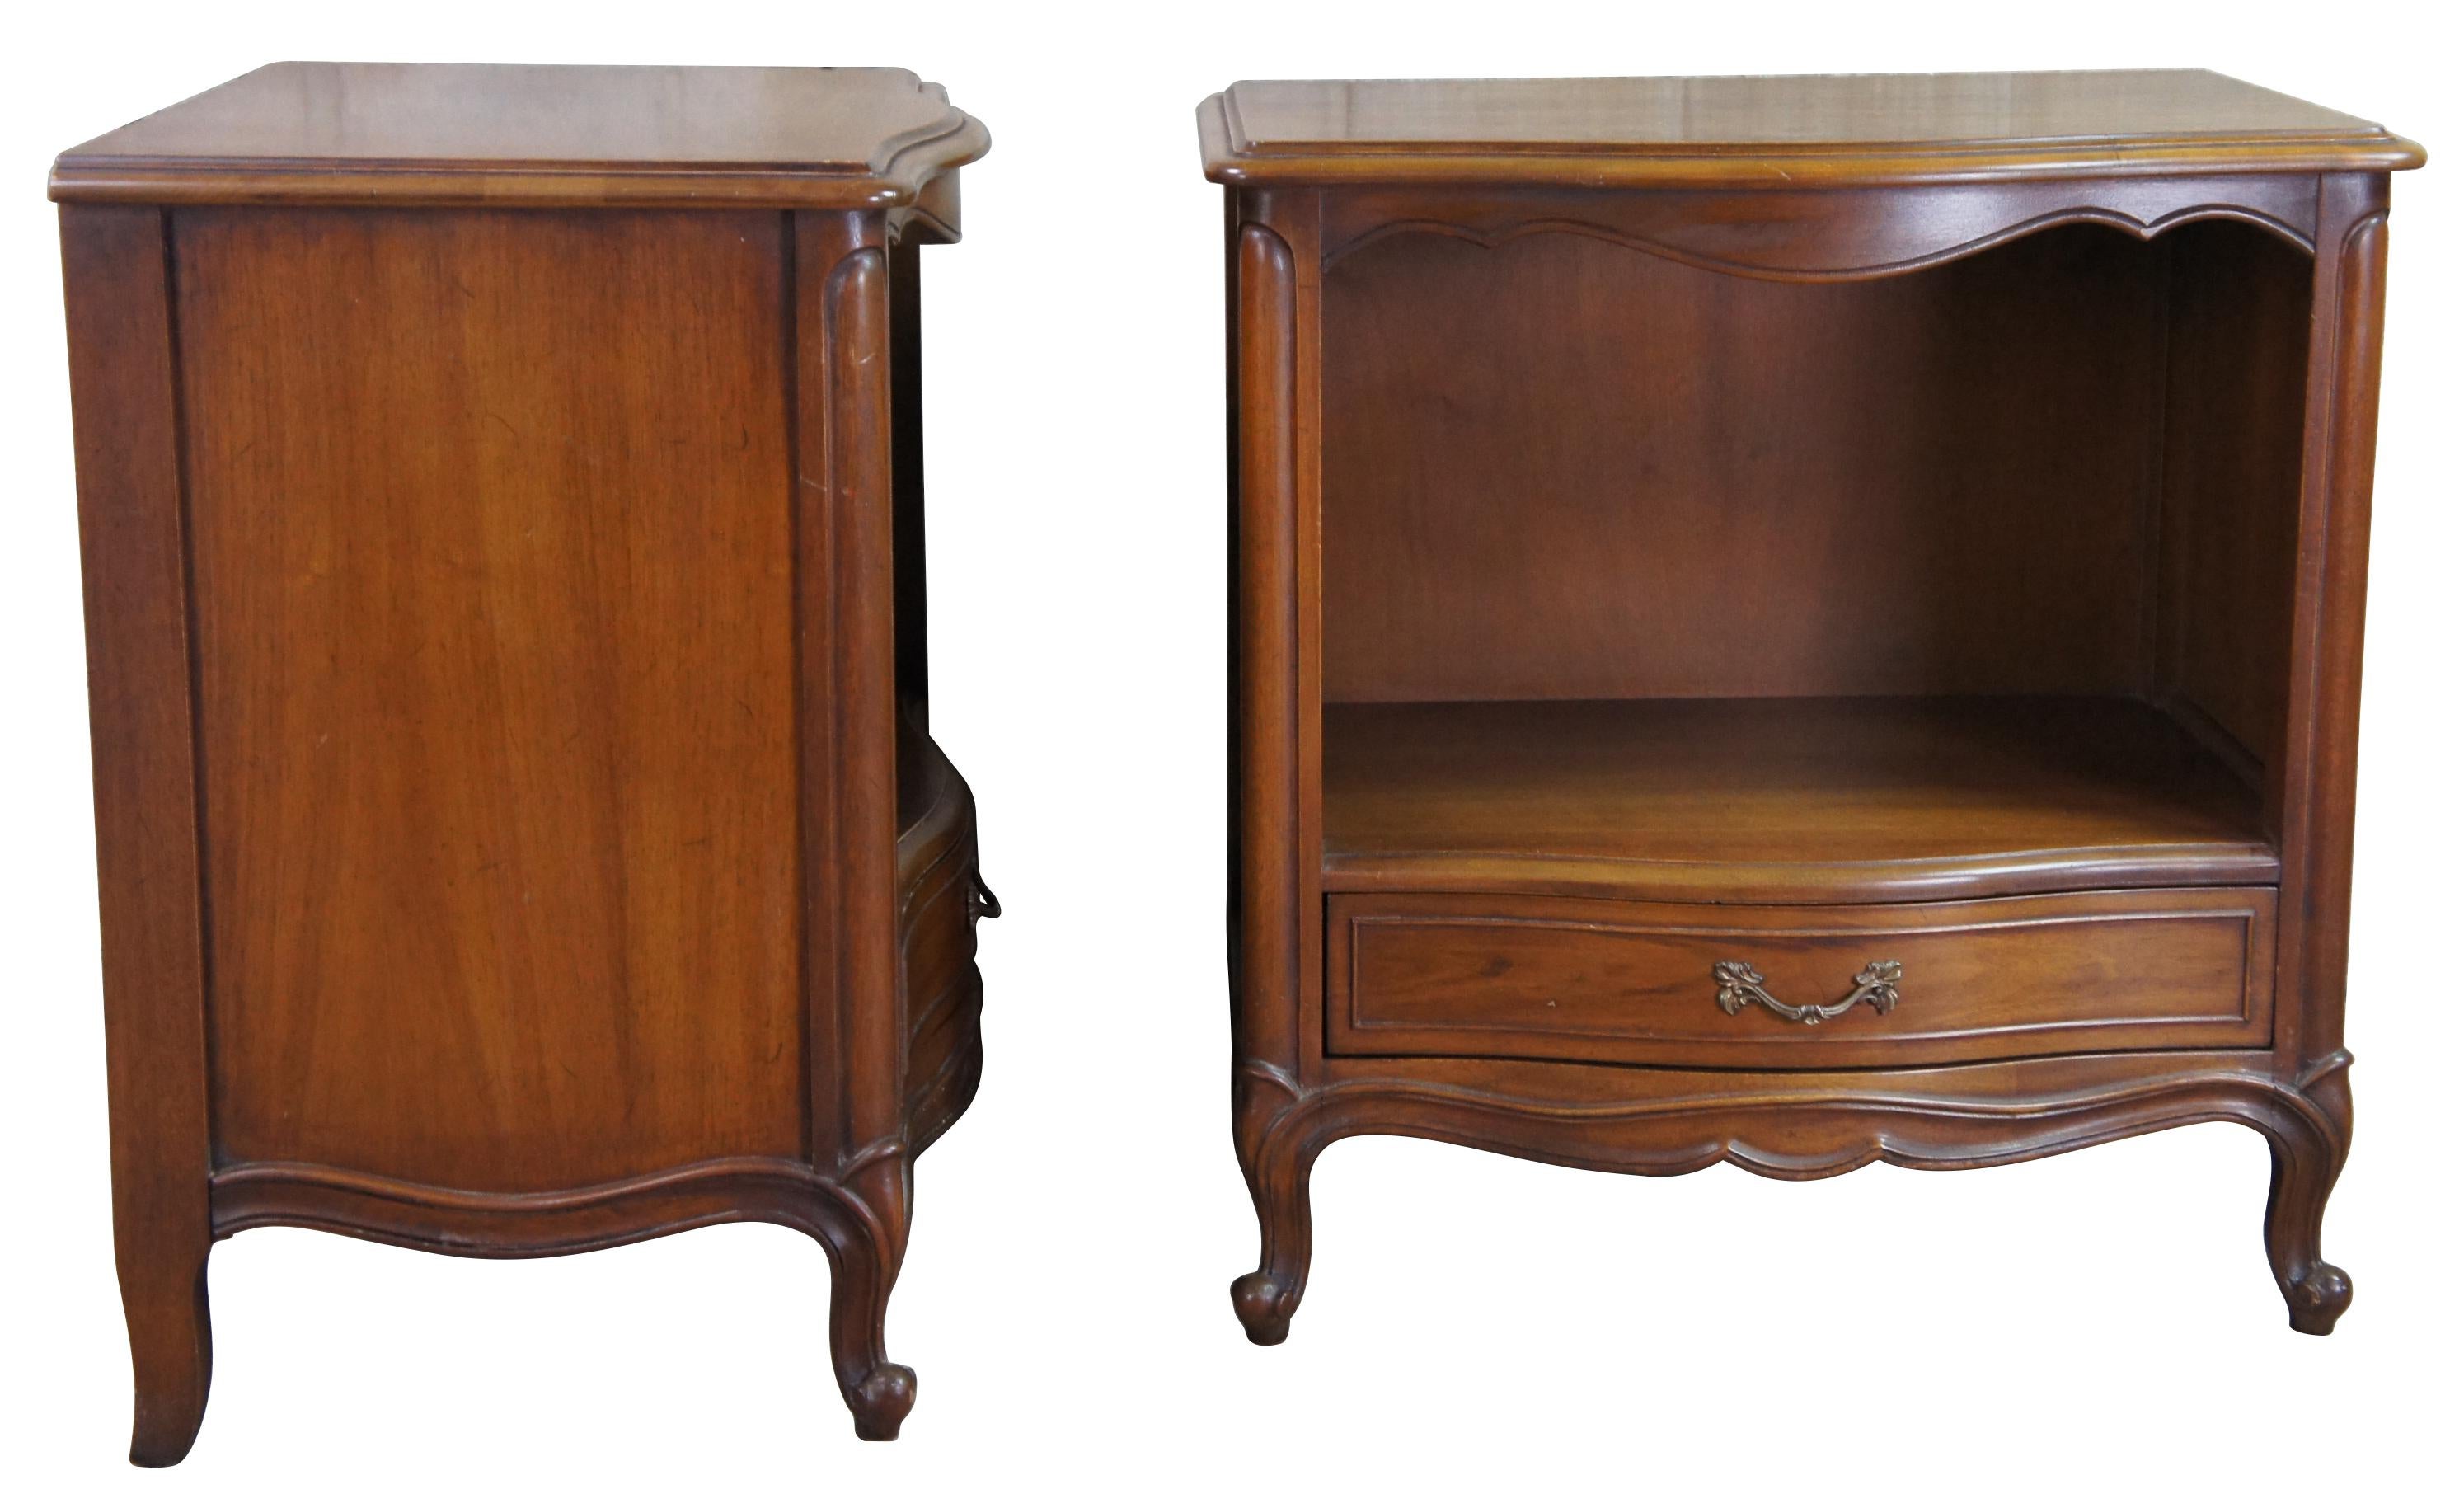 Mid century Drexel Bordeaux nightstands or side accent tables featuring serpentine form with one drawer and open cubby over cabriole legs. Circa 1966-1728.
 